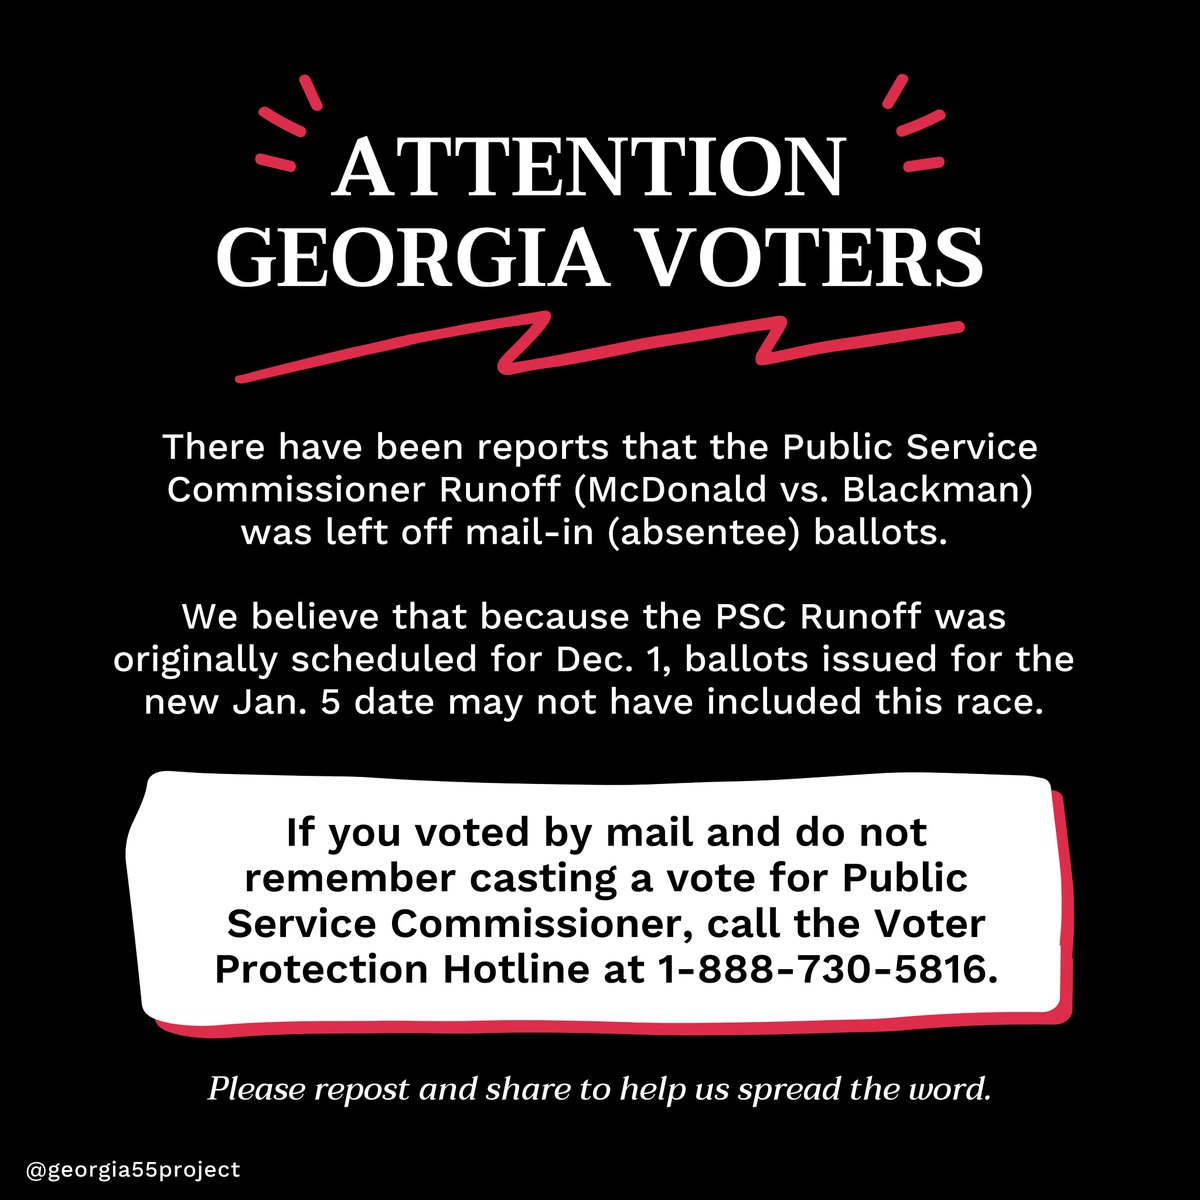 1/2 ATTN GA VOTERS: There have been reports that the Public Service Commissioner Runoff (McDonald v. Blackman) was left off mail-in ballots! We believe that because the runoff was originally scheduled for 12/1, ballots issued for the new 1/5 date may not have included this race.